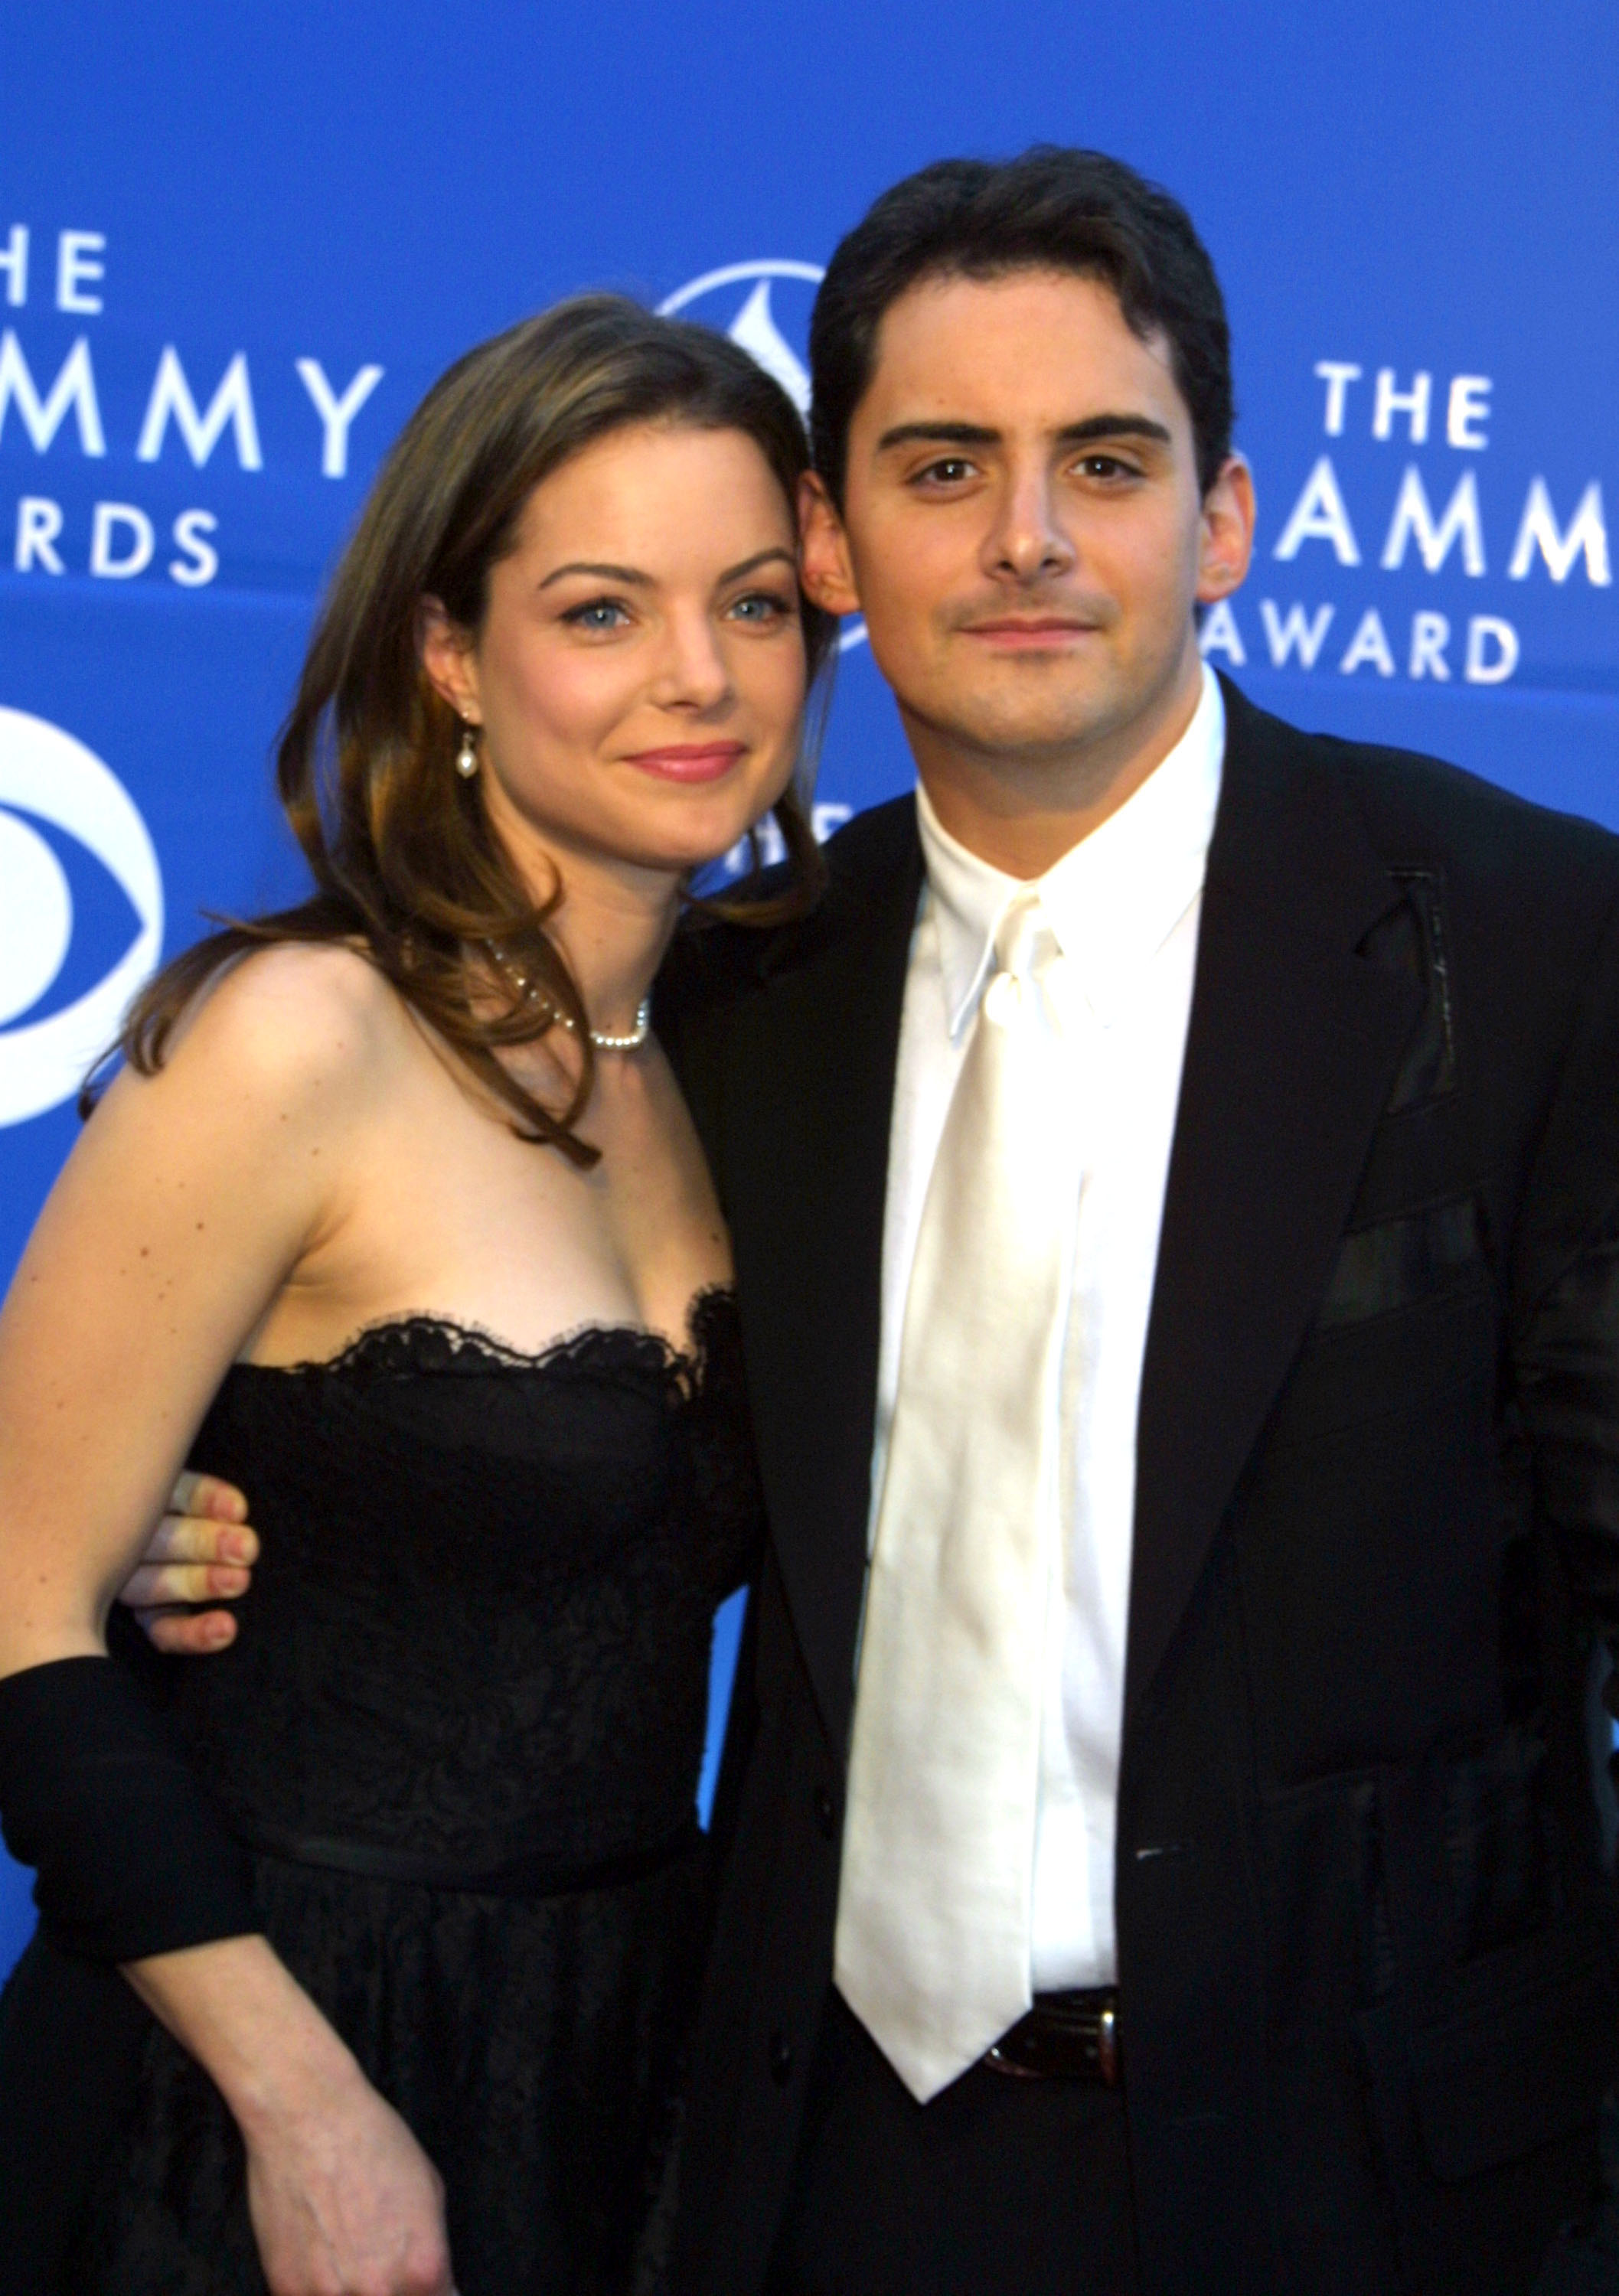 Kimberly Williams & Brad Paisley at the 44th Grammy Awards | Source: Getty Images